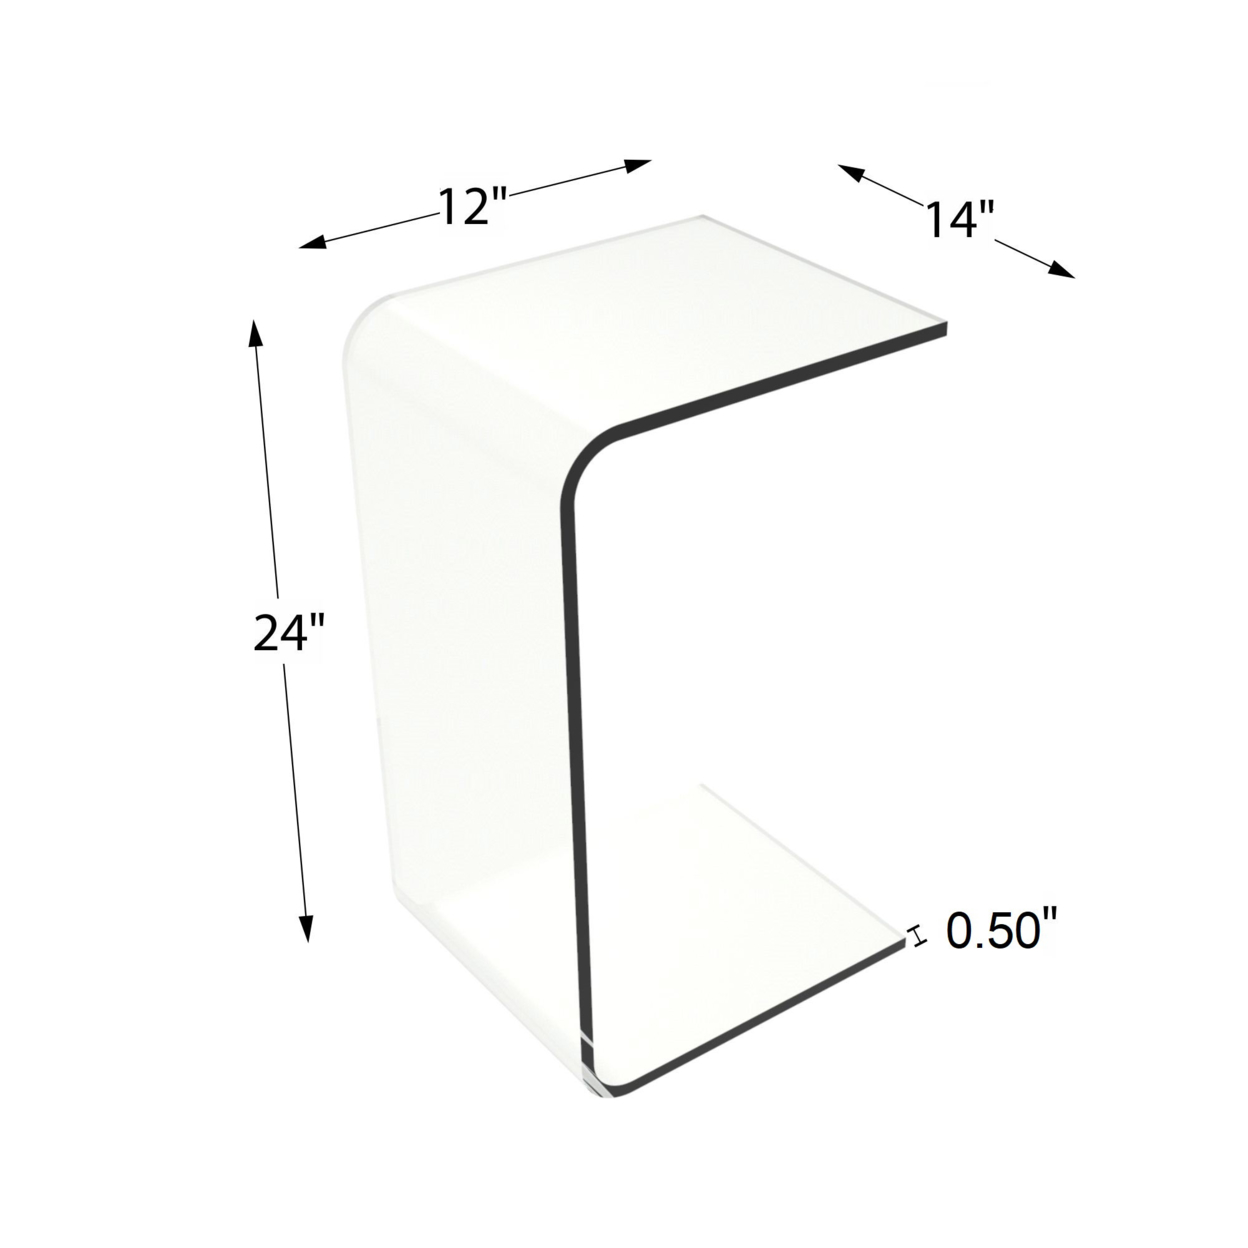 Acrylic End Table Clear C Style Modern See Through Laptop Desk Bed Many Uses 24 X 12 X 14 Inches